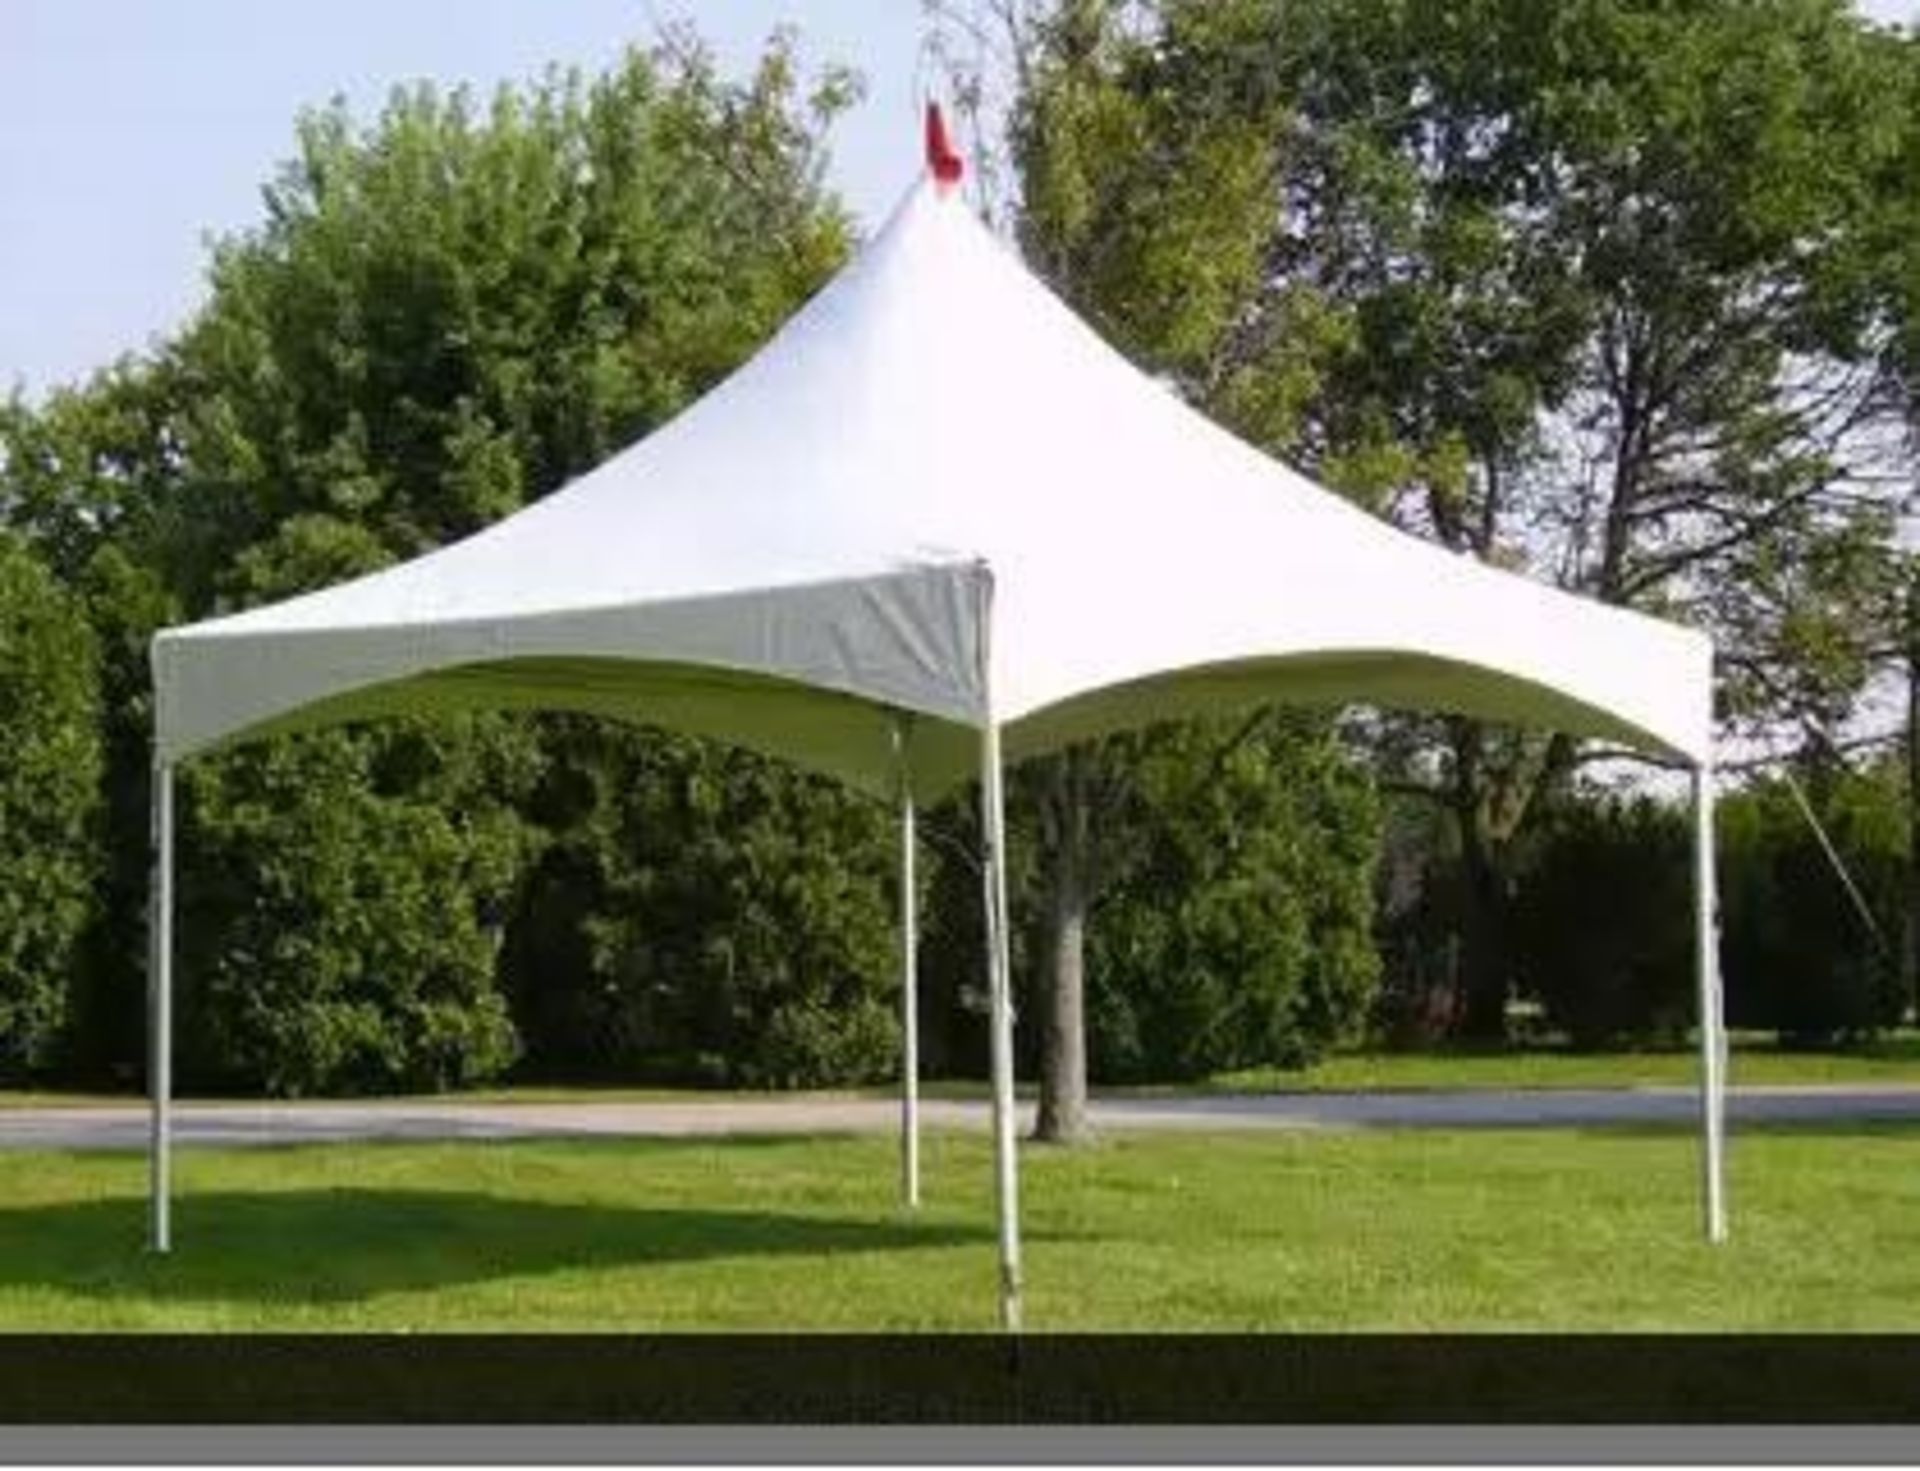 LOT: (2) Canopy - 10 ft.. x 10 ft.. x 7ft.., White, Central Tent Quick Peak